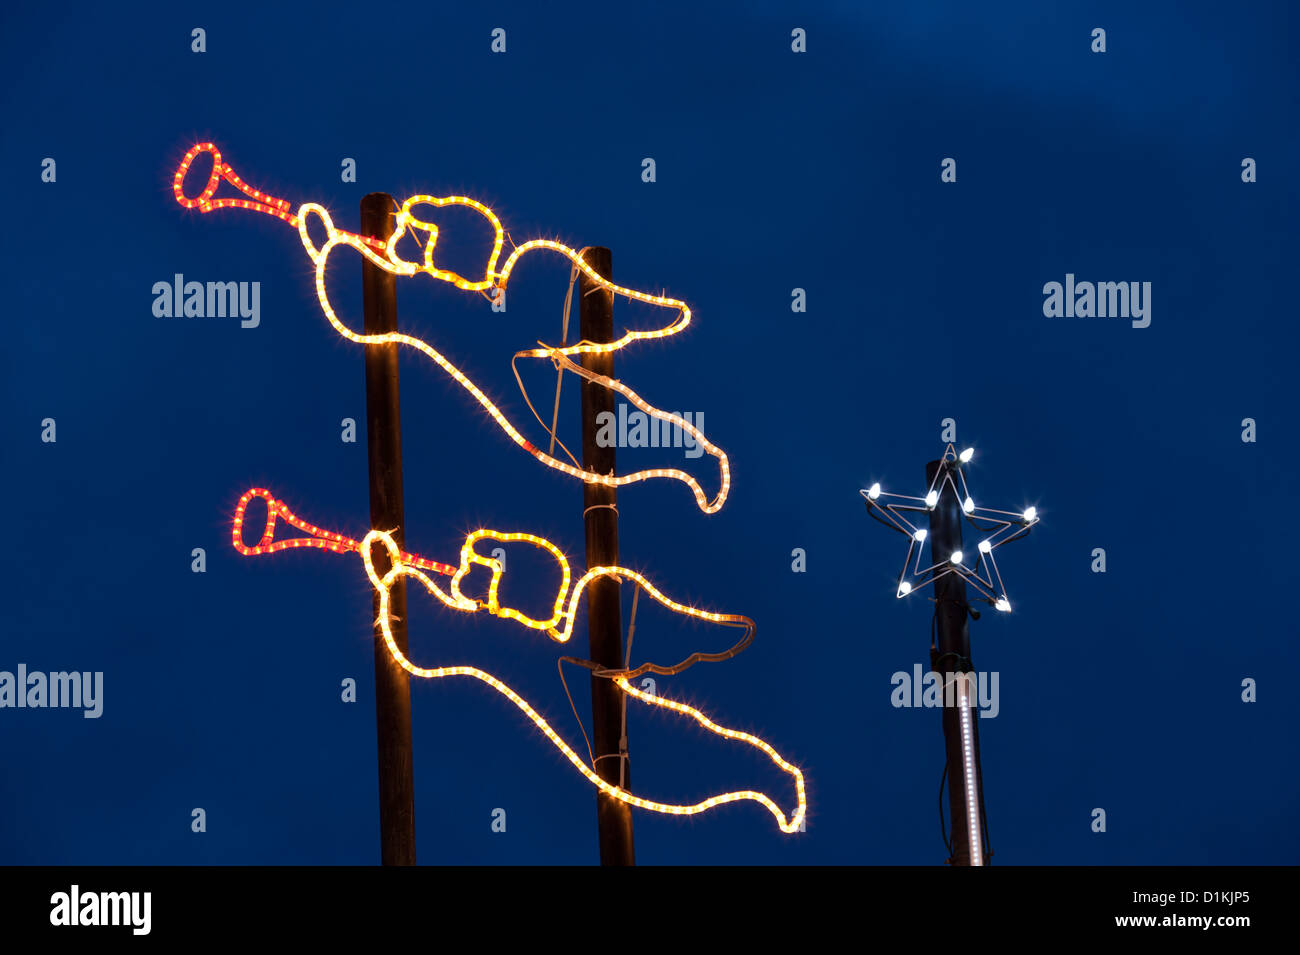 Angels playing trumpets on house lit up for annual Christmas season.-Victoria, British Columbia, Canada. Stock Photo